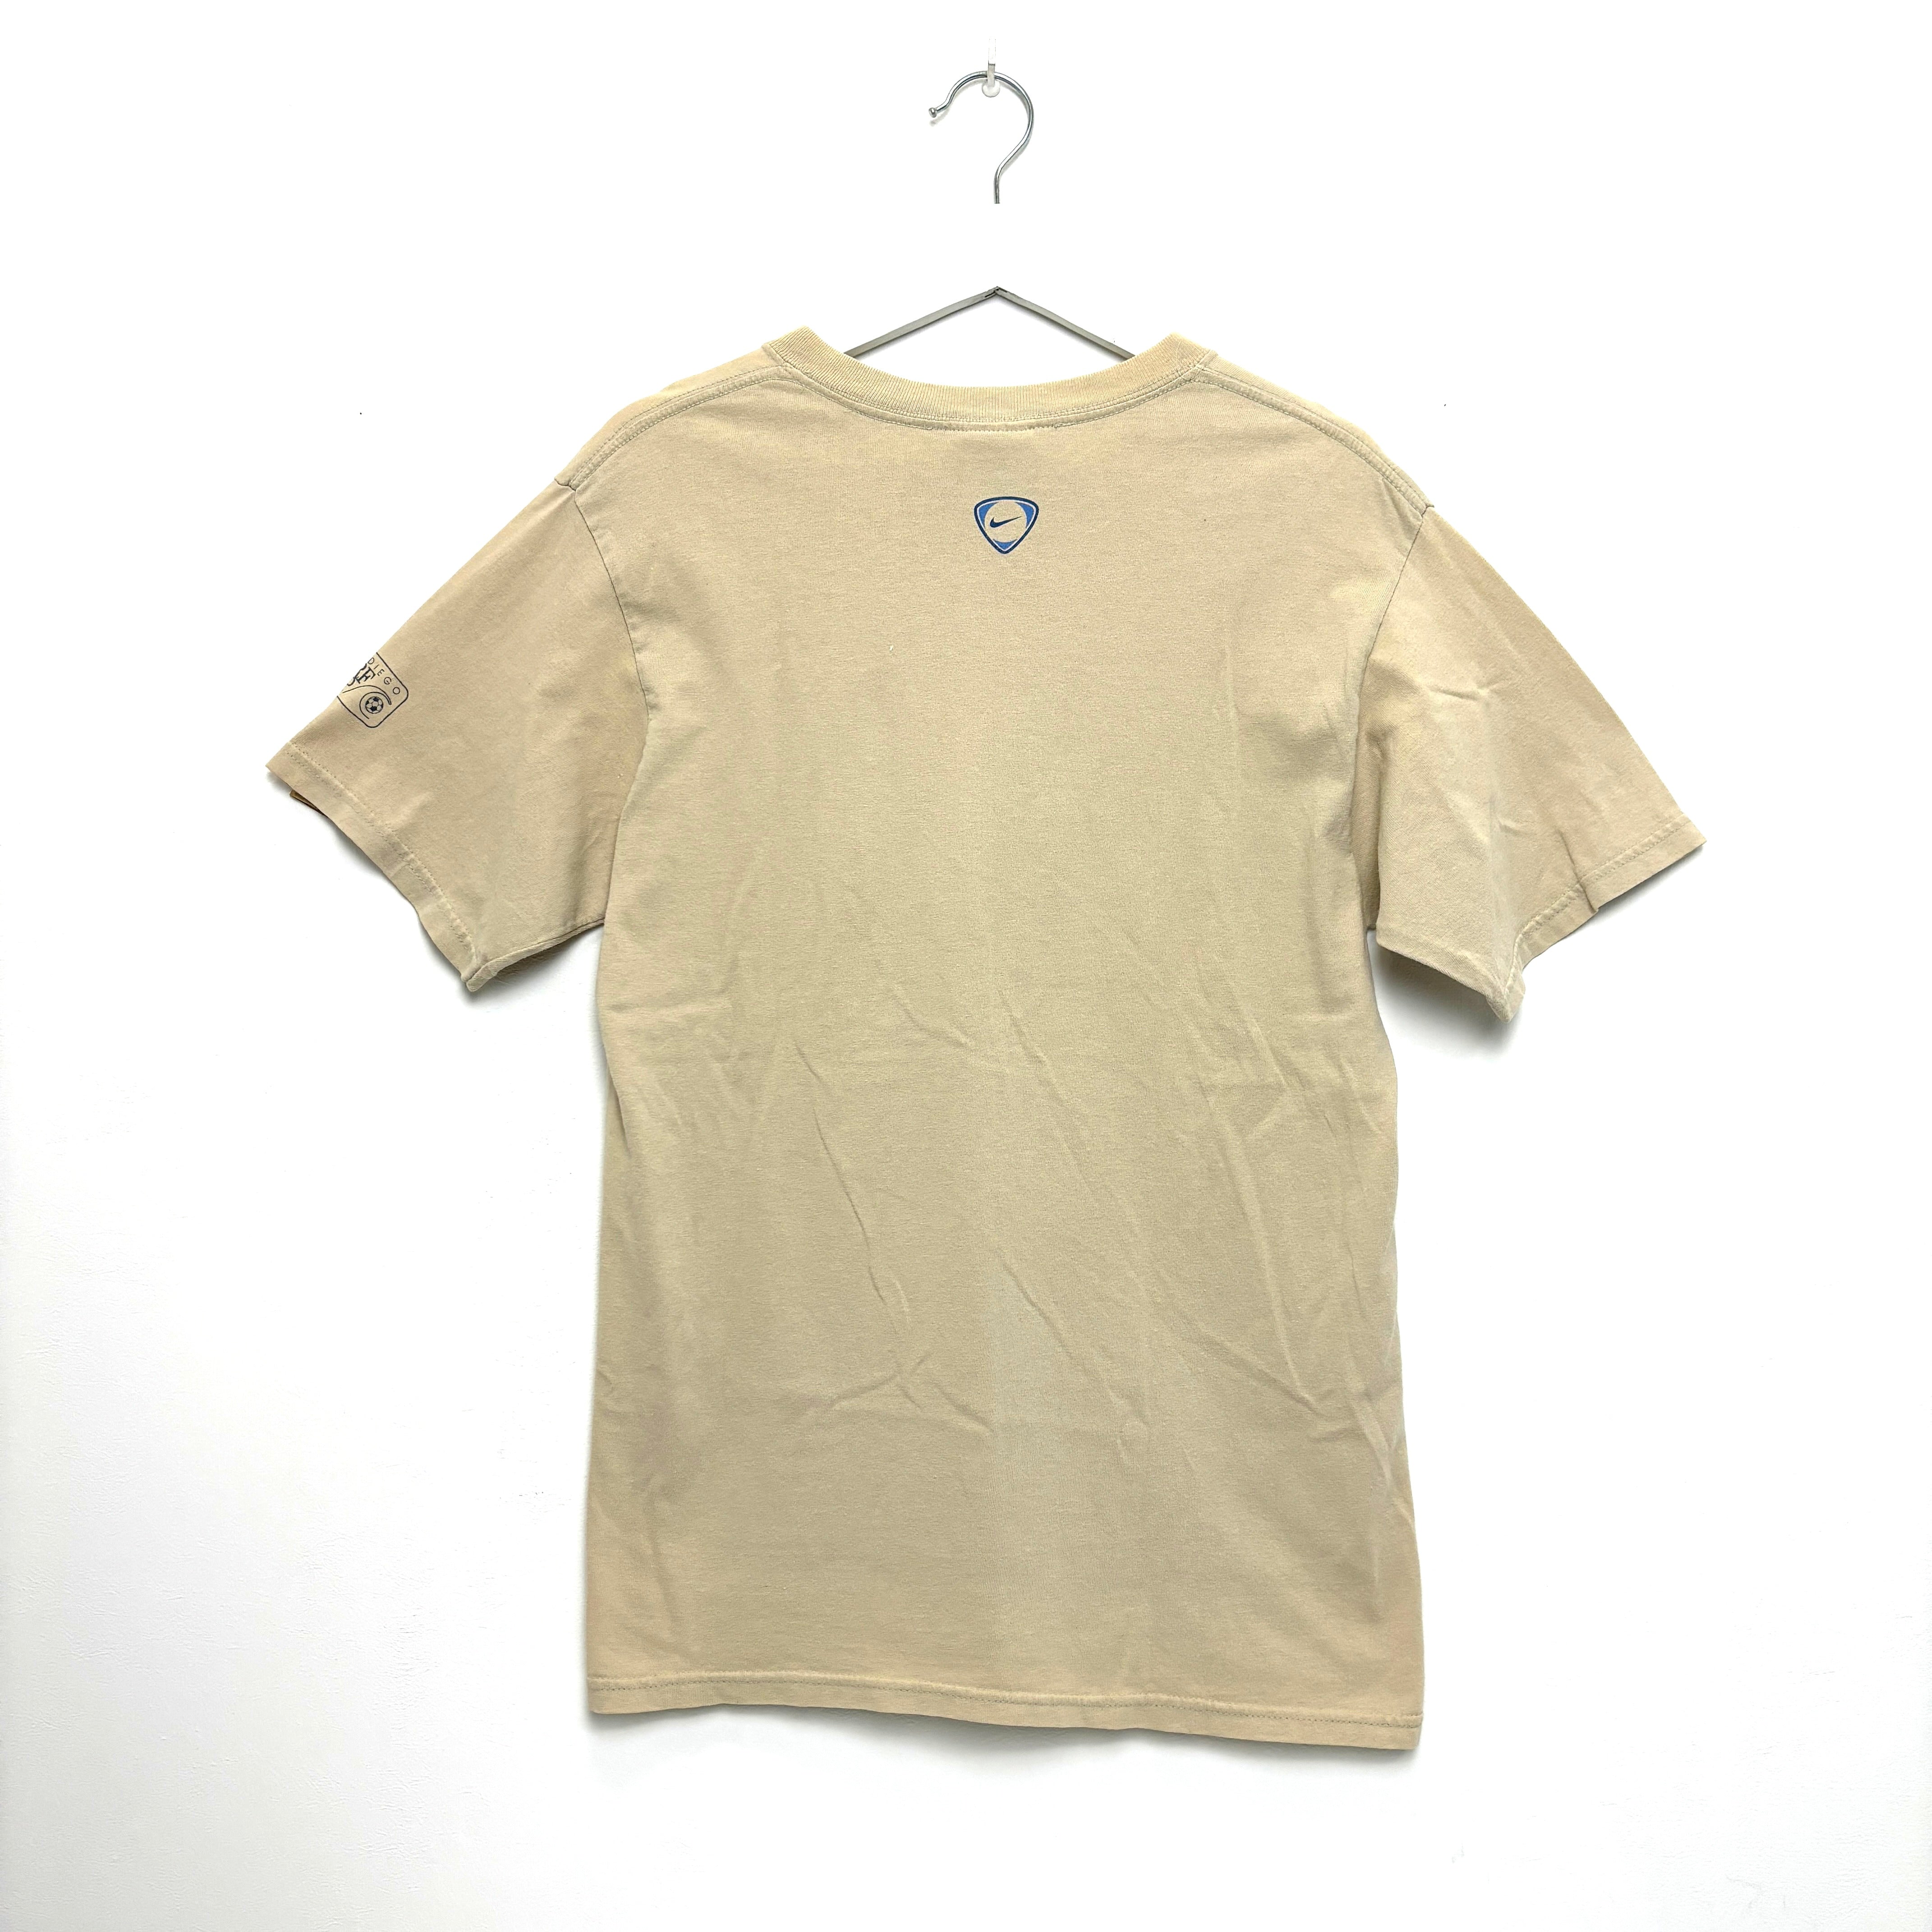 90s NIKE SAN DIEGO Surf Cup Graphic logo T-Shirt Beige Tee